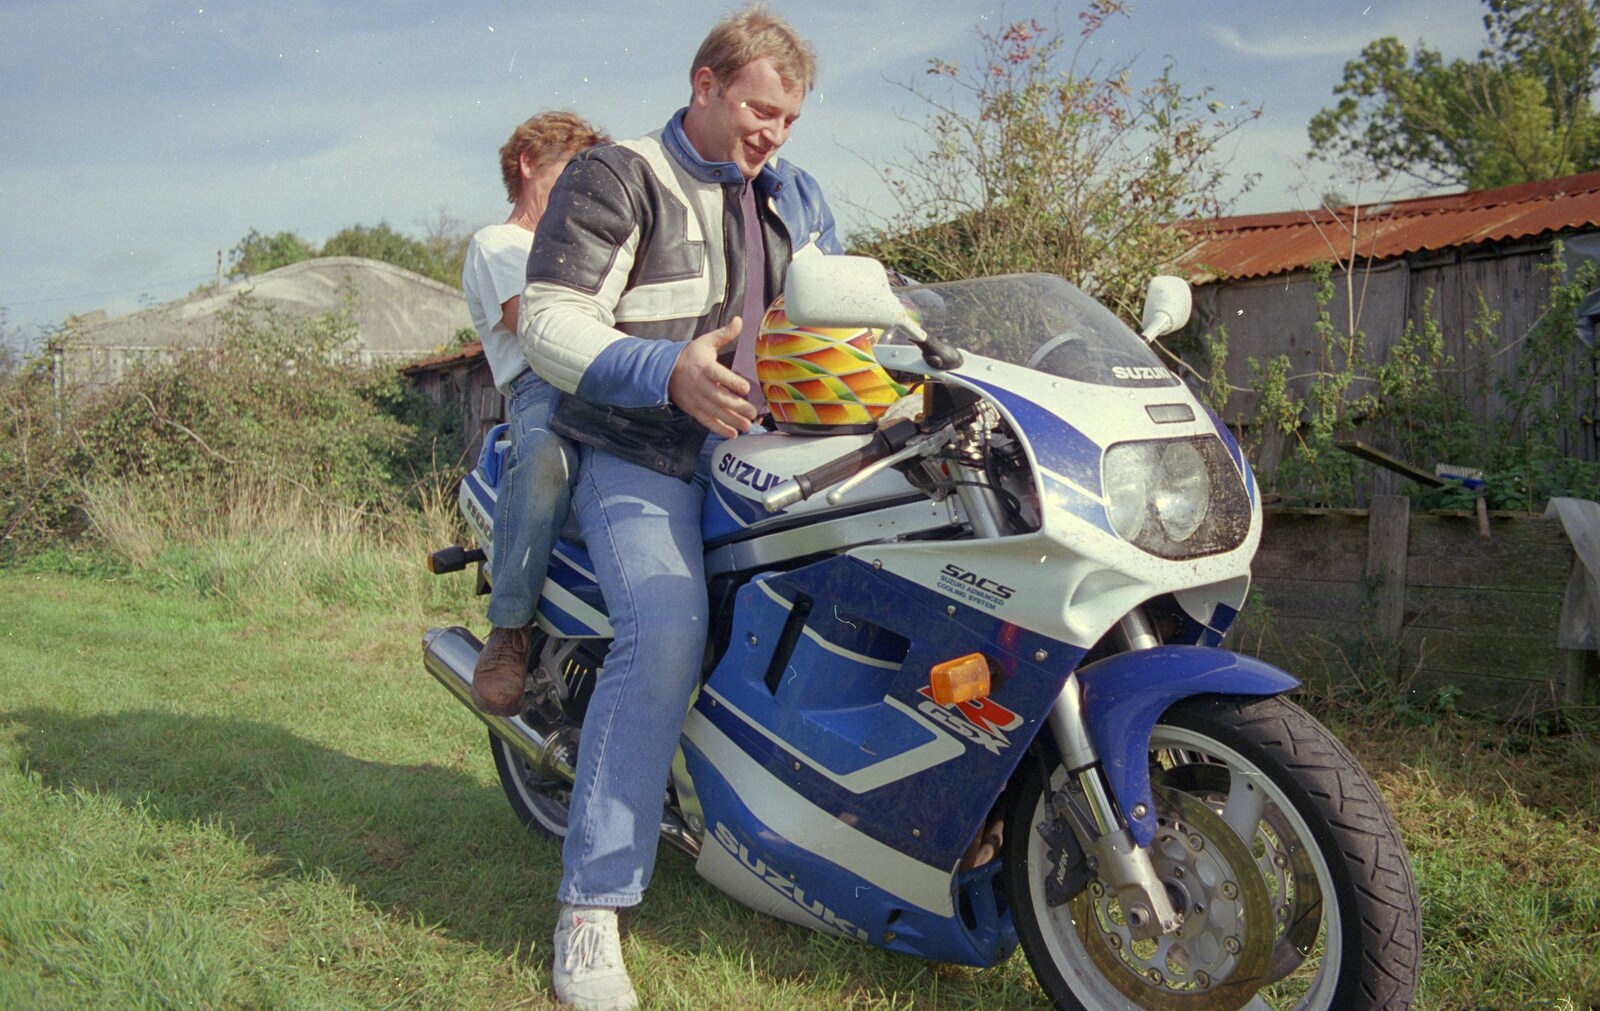 Brenda on the back of a bike from Cider Making With Geoff and Brenda, Stuston, Suffolk - 10th September 1998